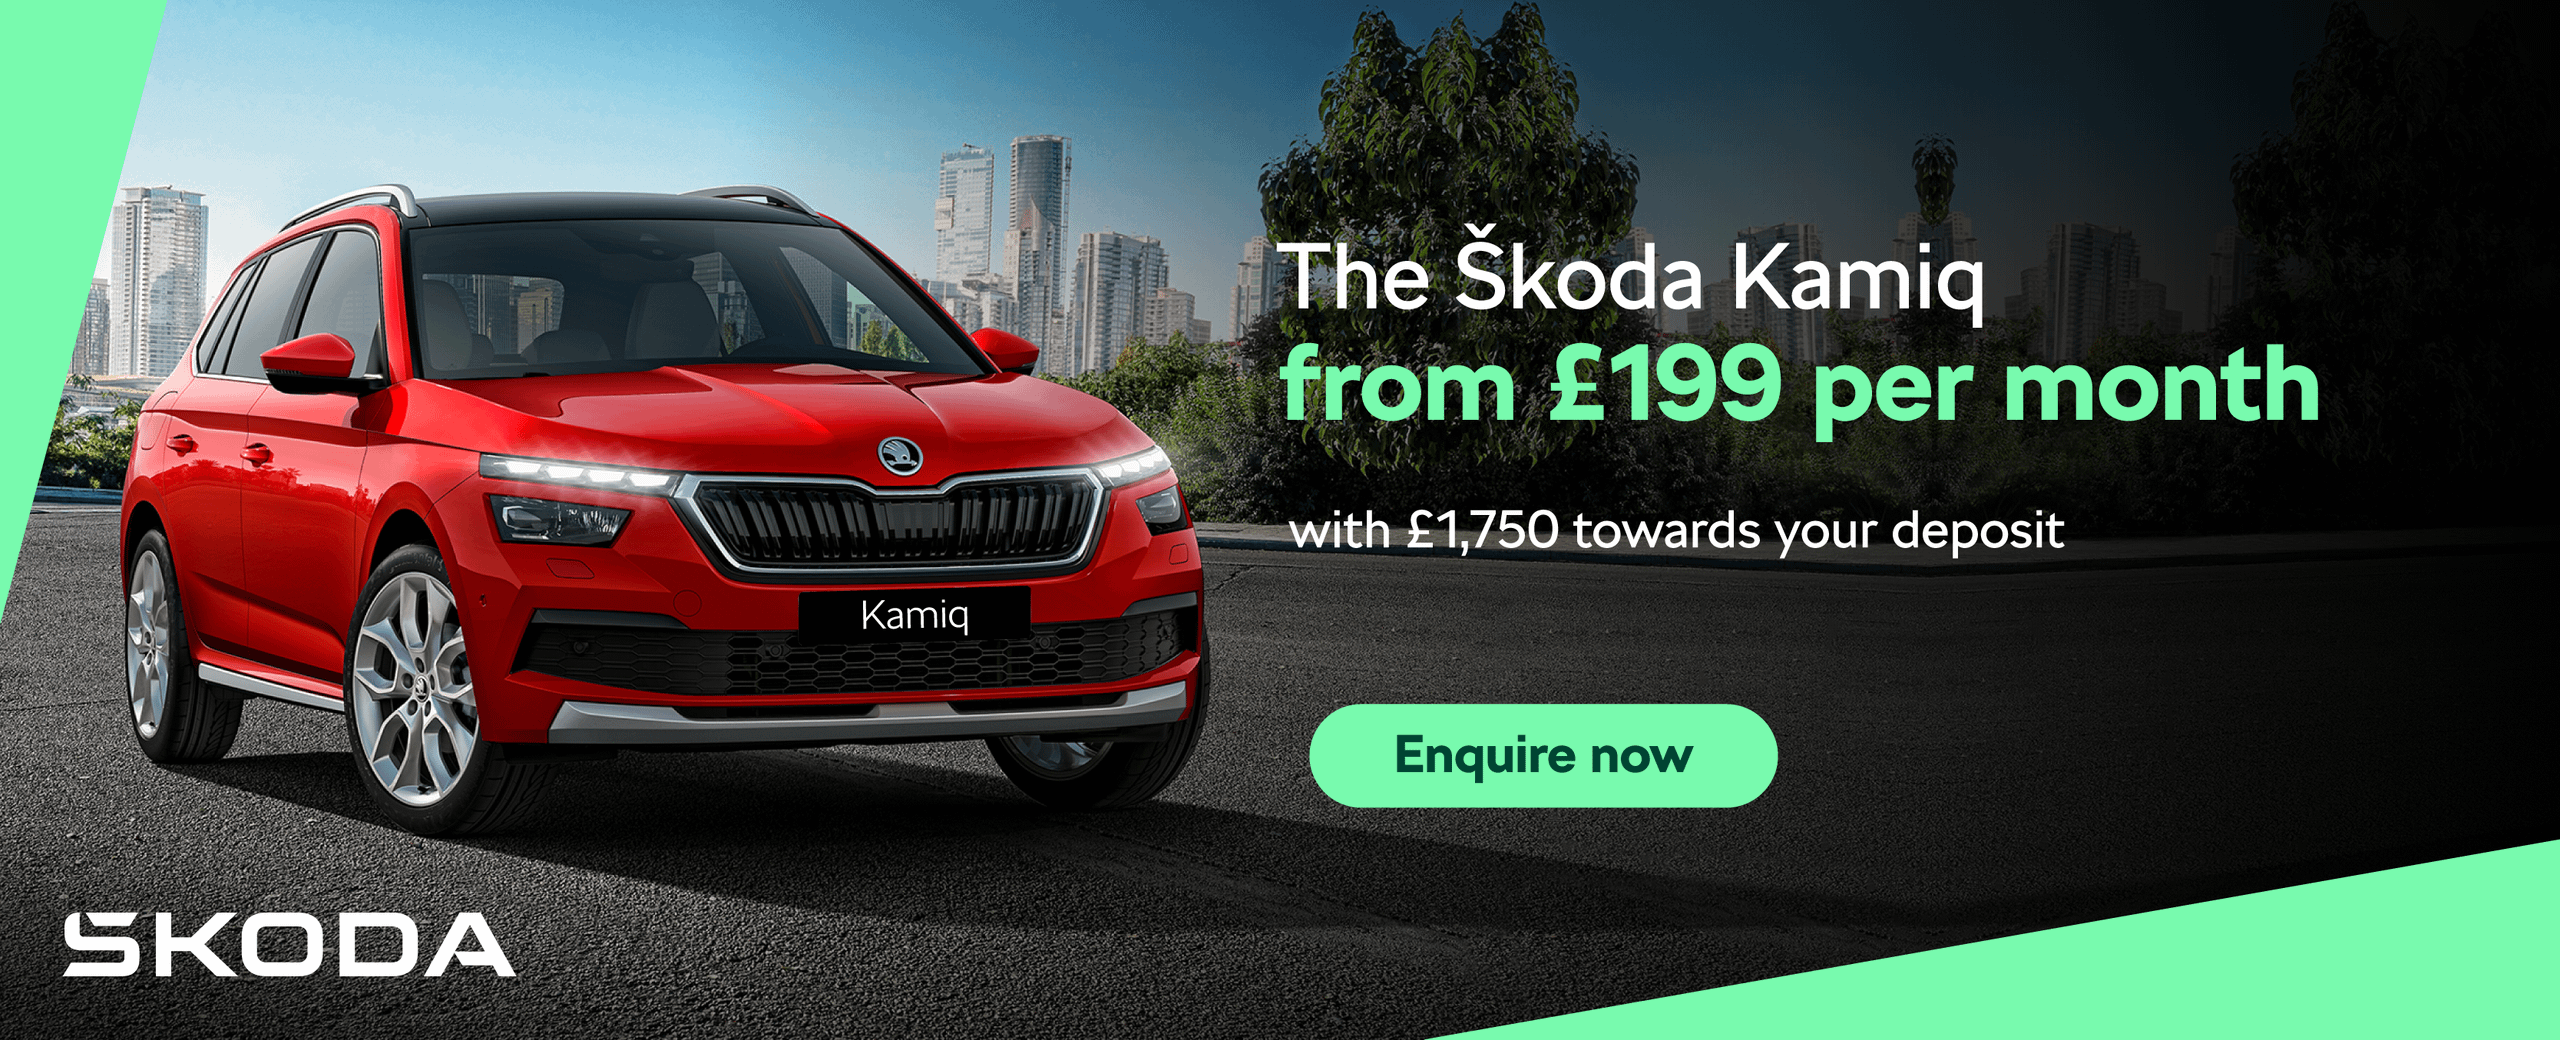 It's a Skoda campaign - honest | Advertising | The Guardian